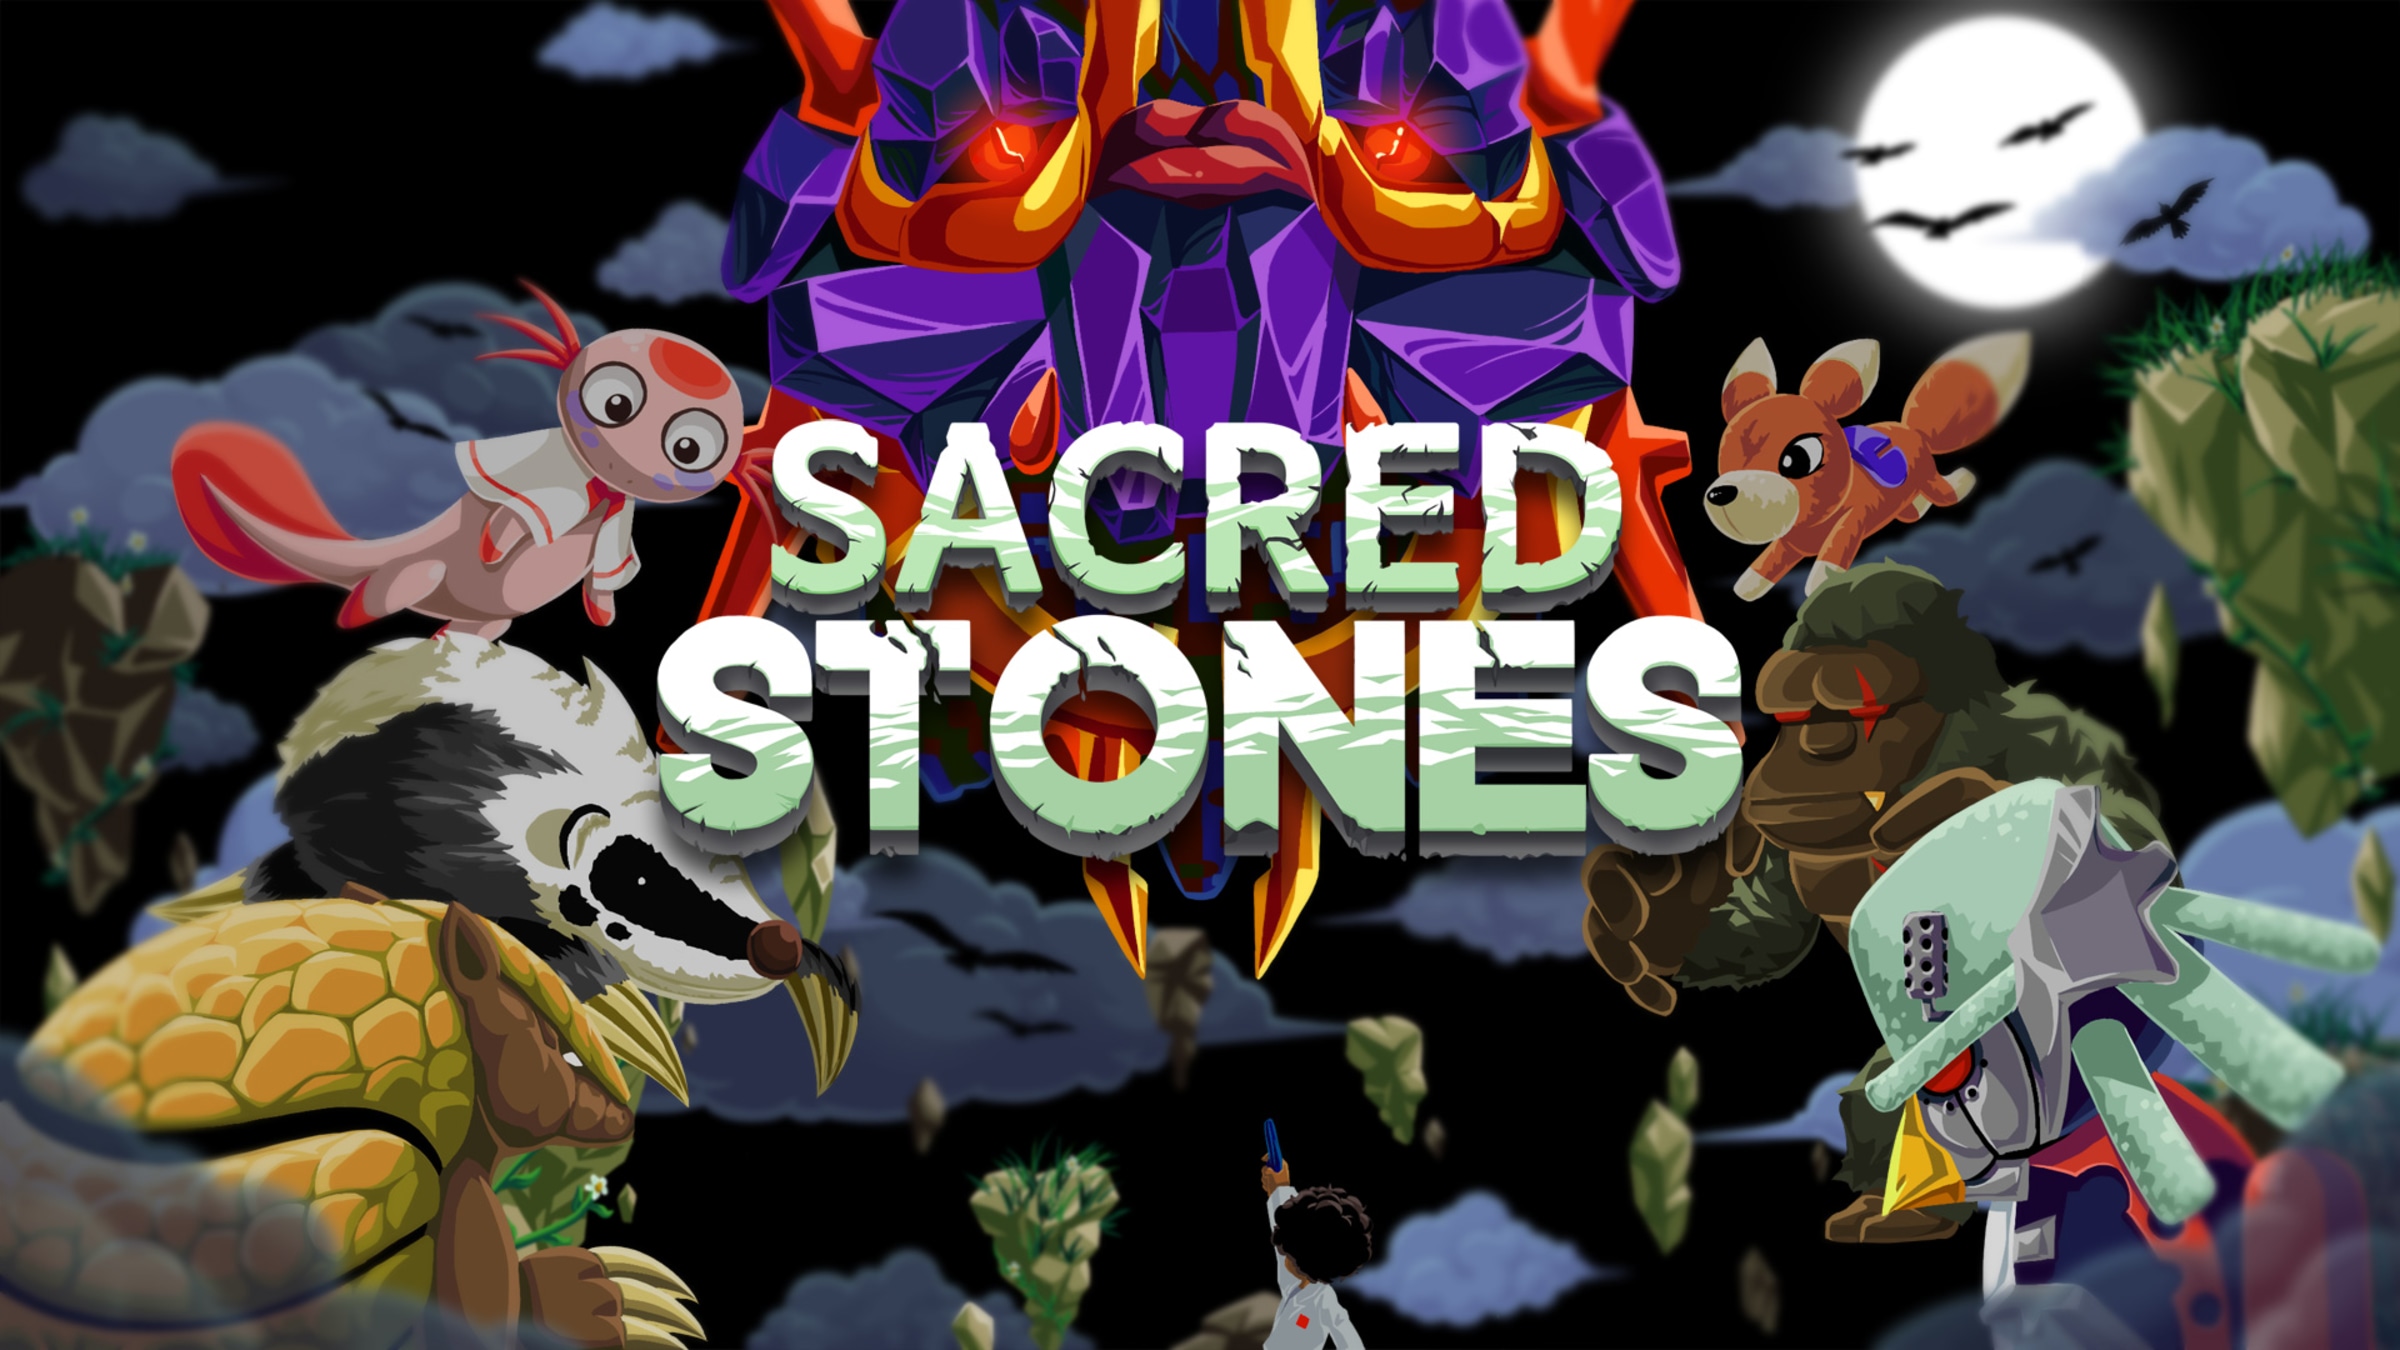 Sharing Stone for Nintendo Switch - Nintendo Official Site